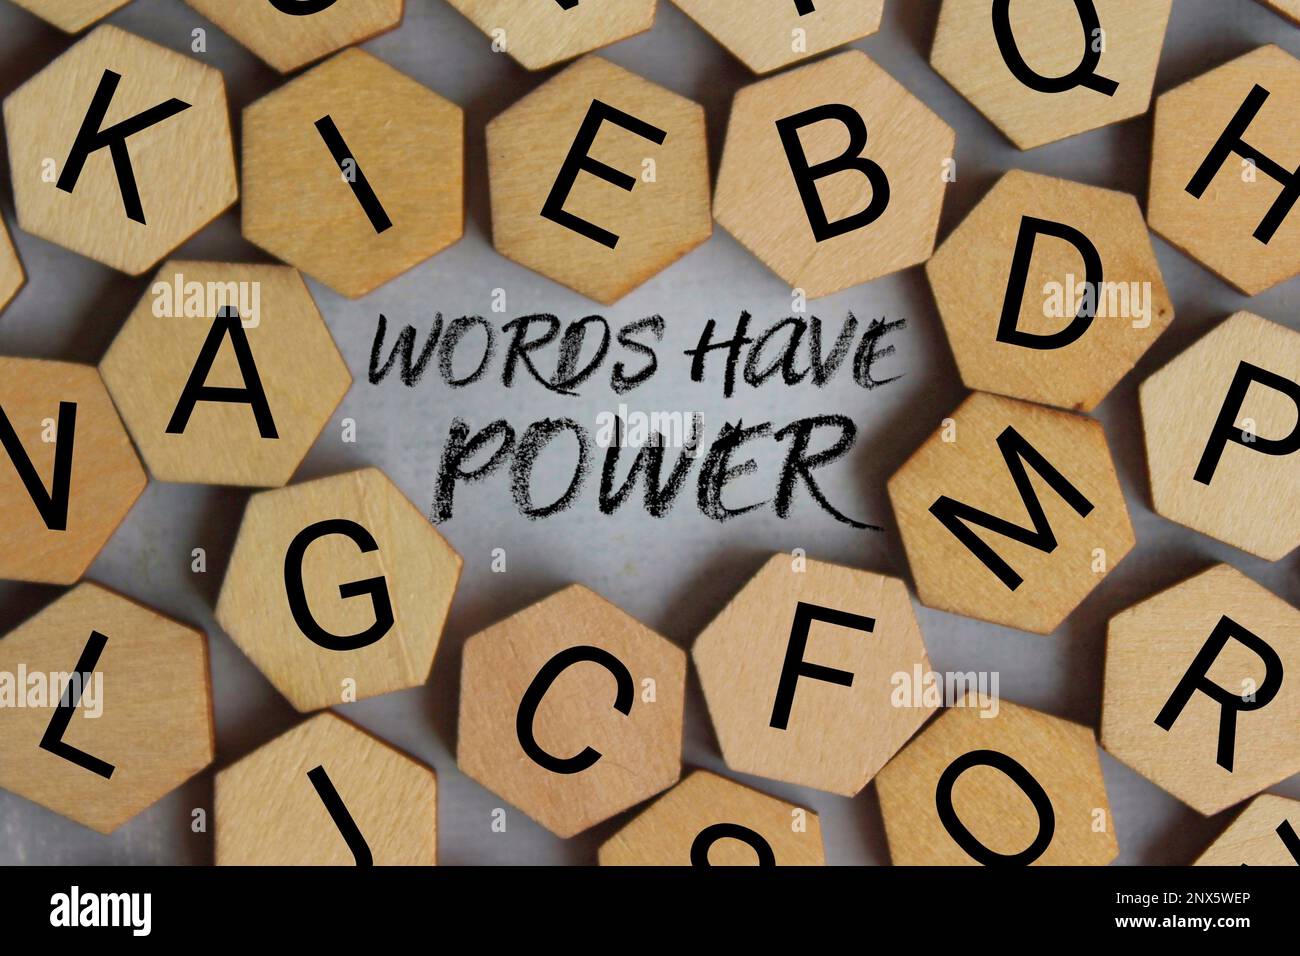 Top view image of wooden tiles with alphabets and text WORDS HAVE POWER Stock Photo